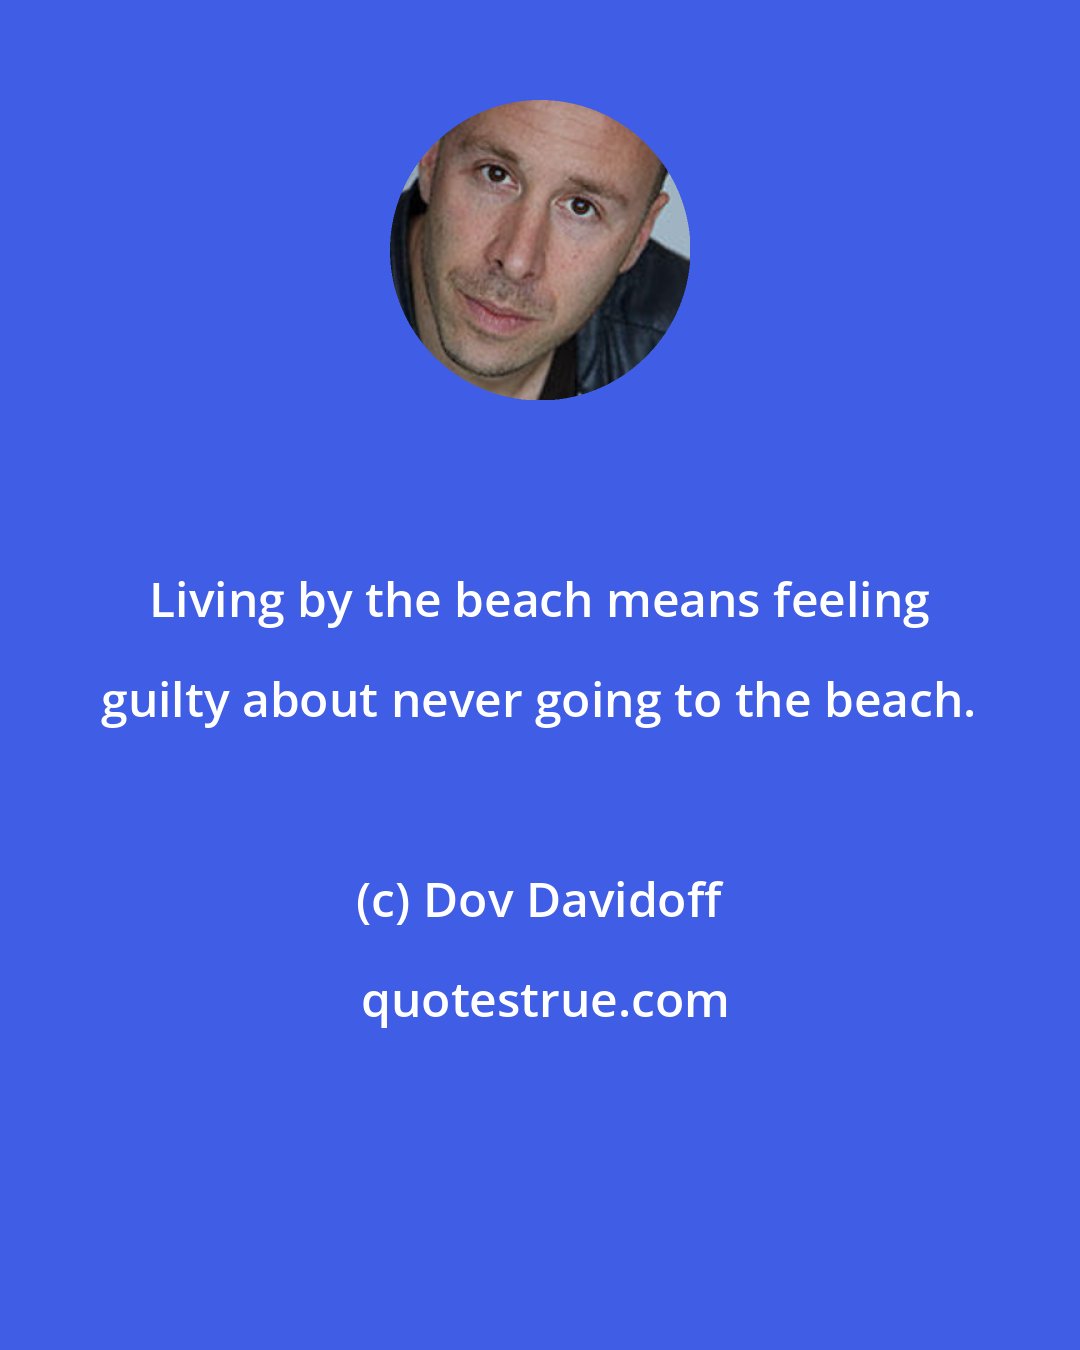 Dov Davidoff: Living by the beach means feeling guilty about never going to the beach.